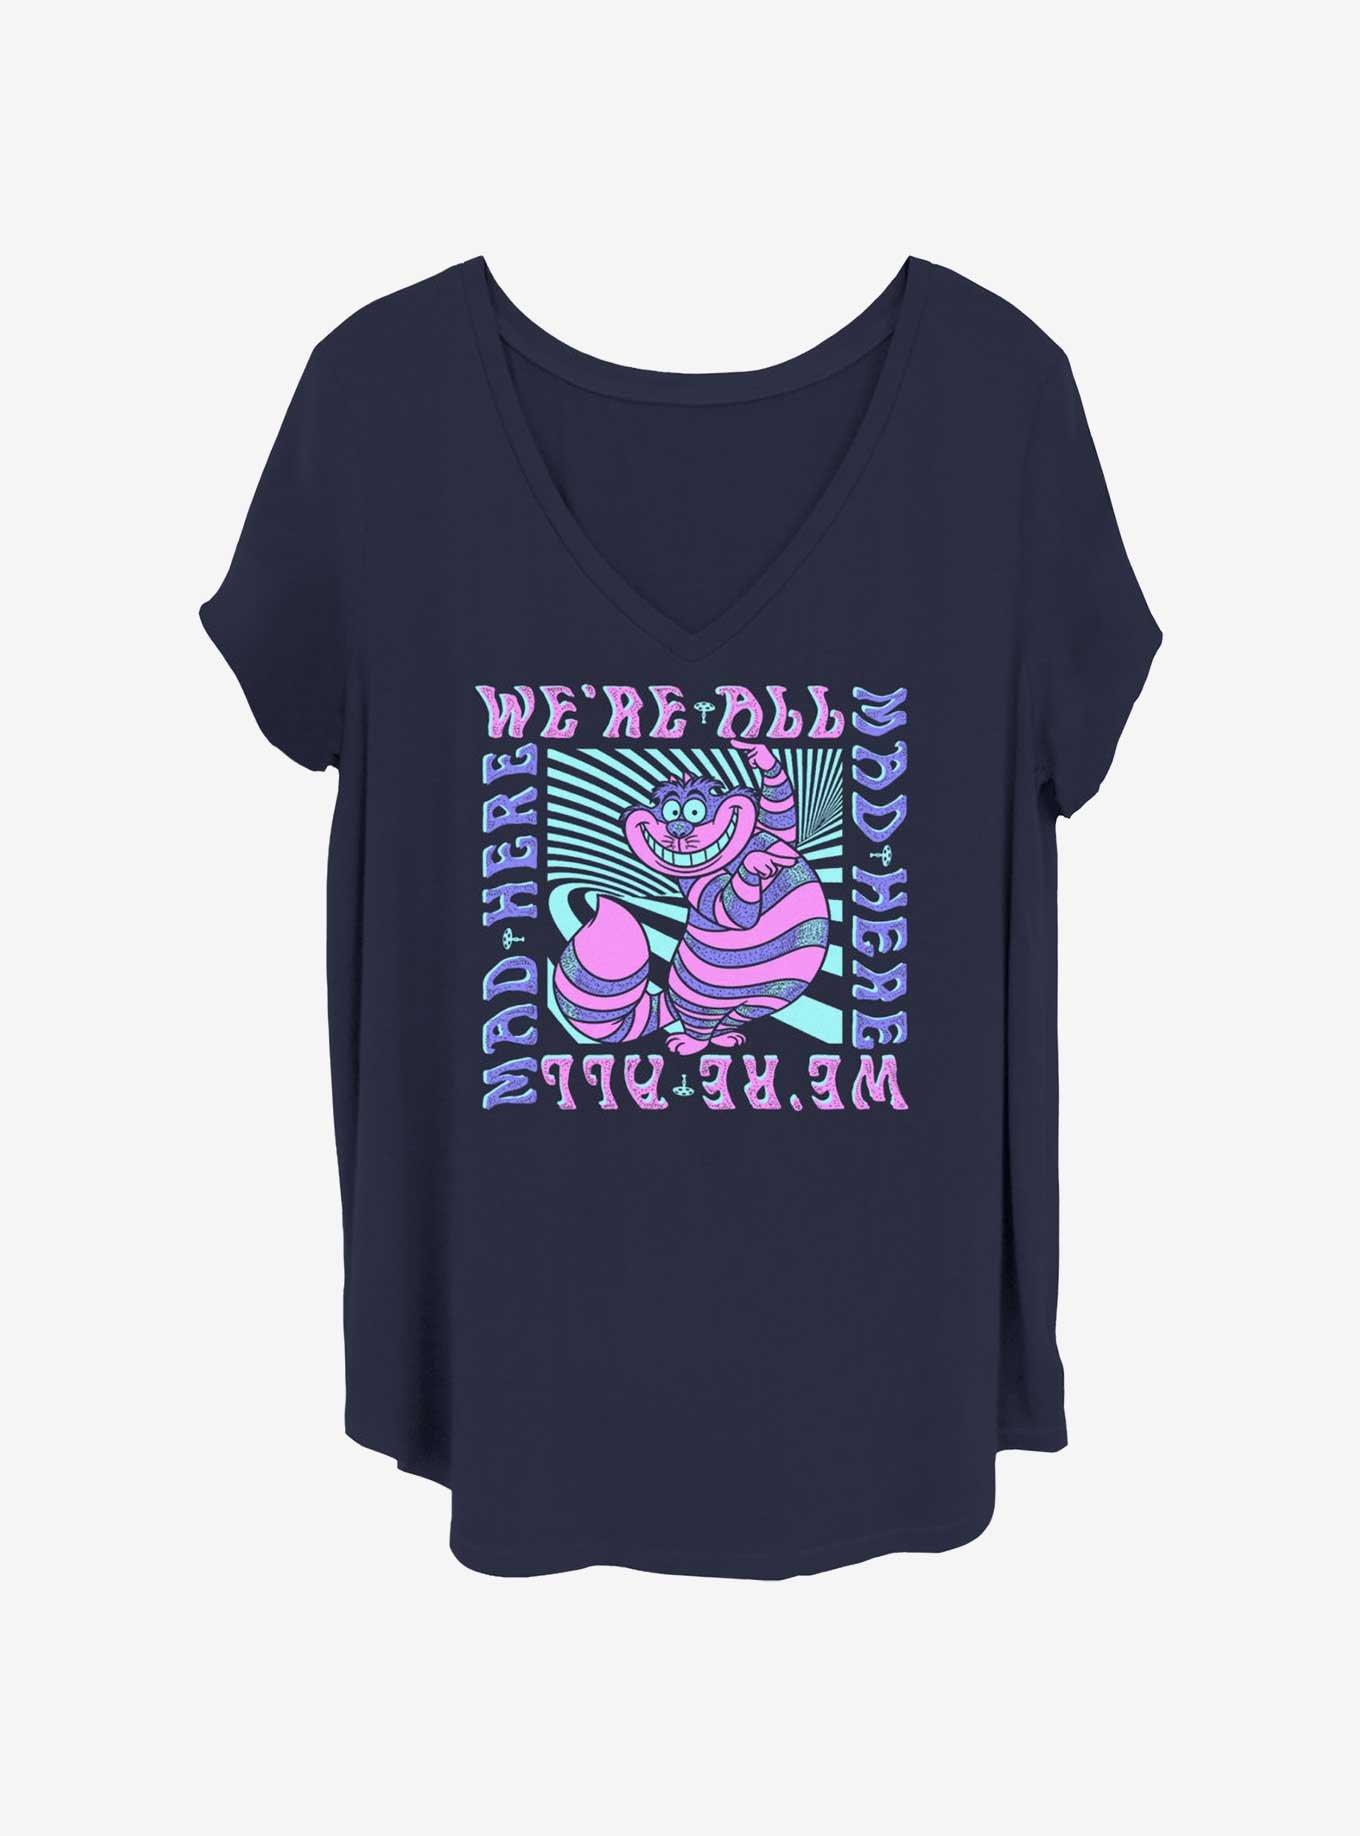 Disney Alice In Wonderland Cheshire We're All Mad Here Girls T-Shirt Plus Size